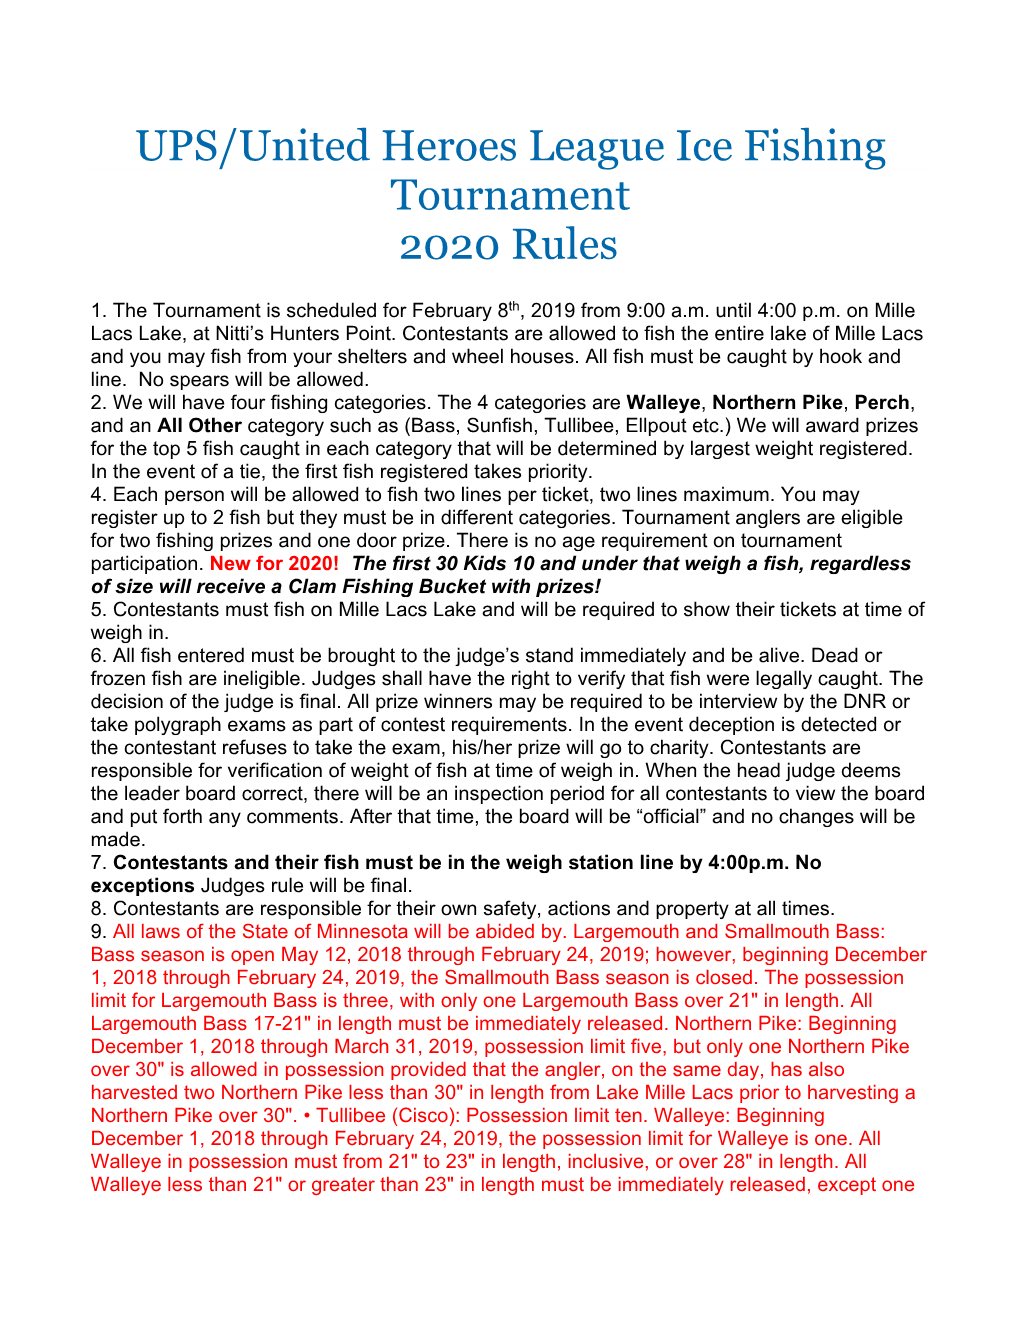 UPS/United Heroes League Ice Fishing Tournament 2020 Rules